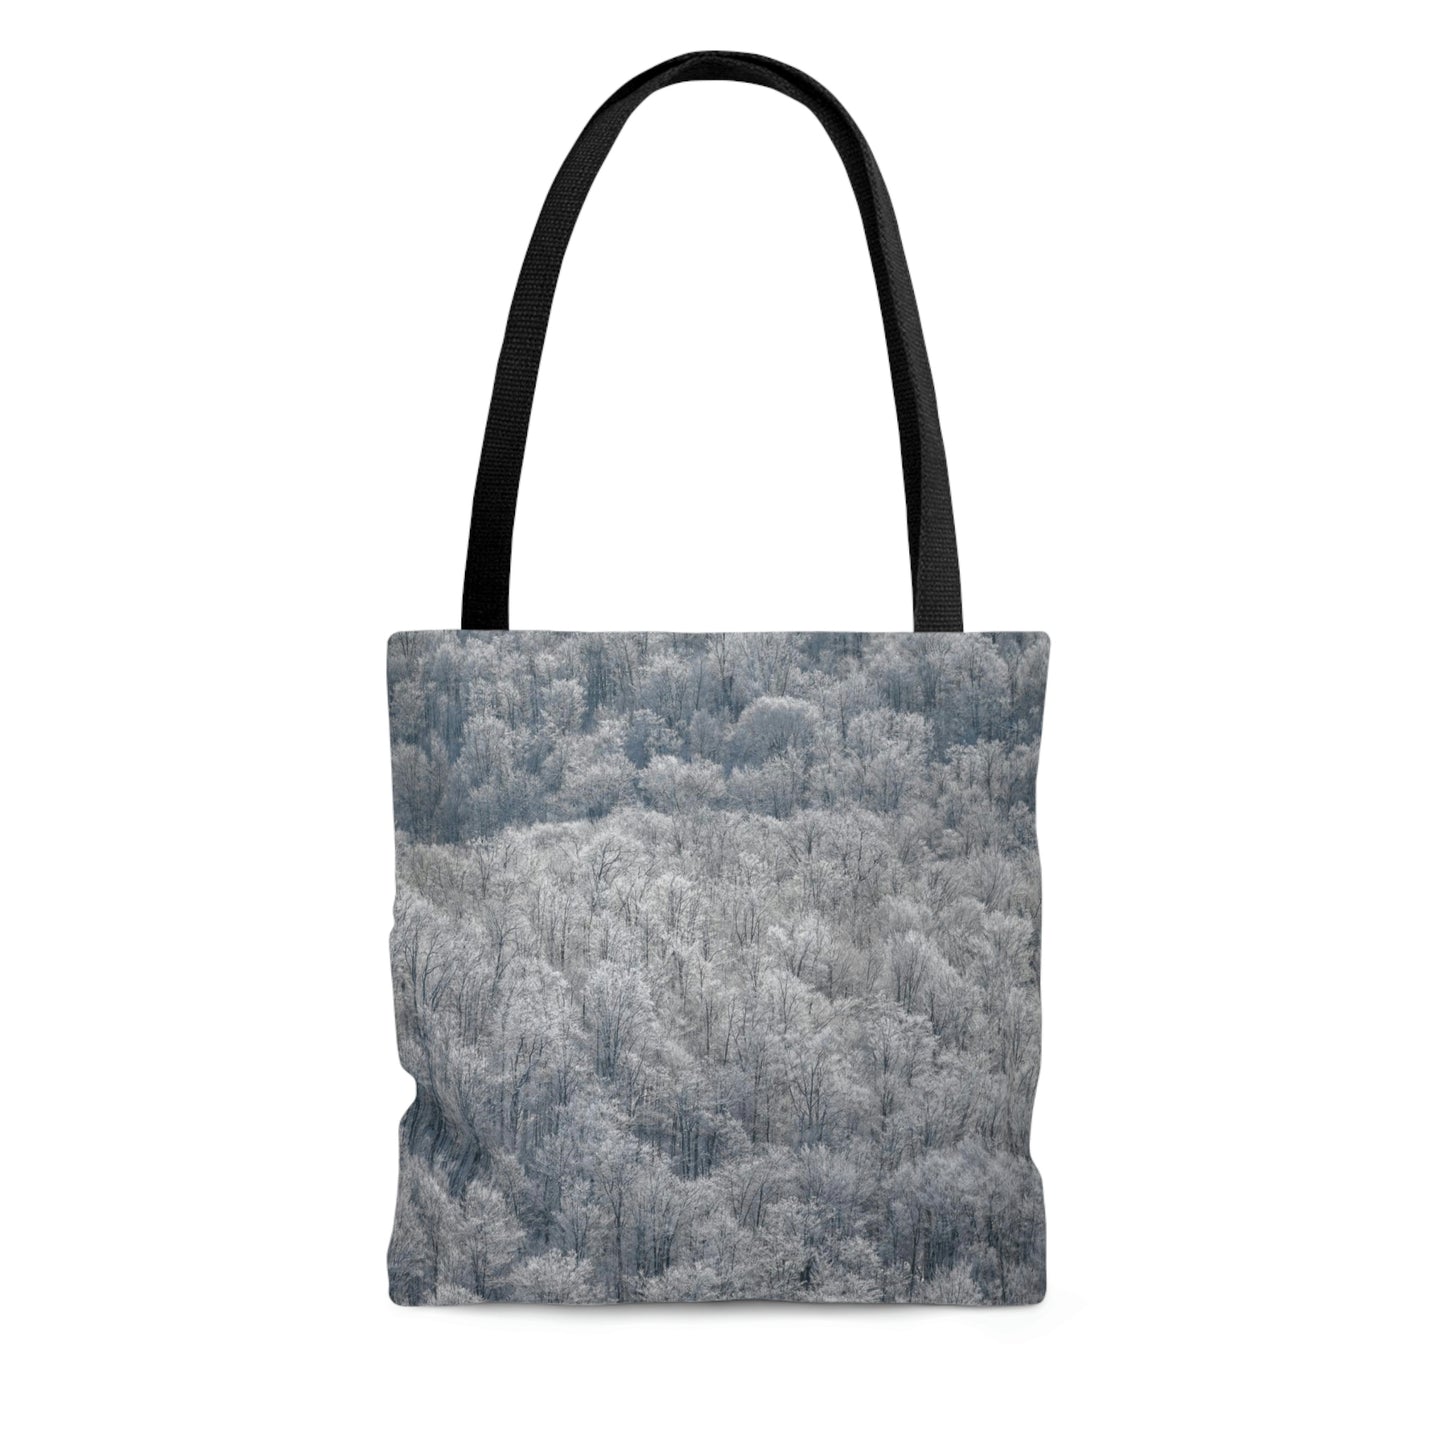 Tote Bag - Frozen trees